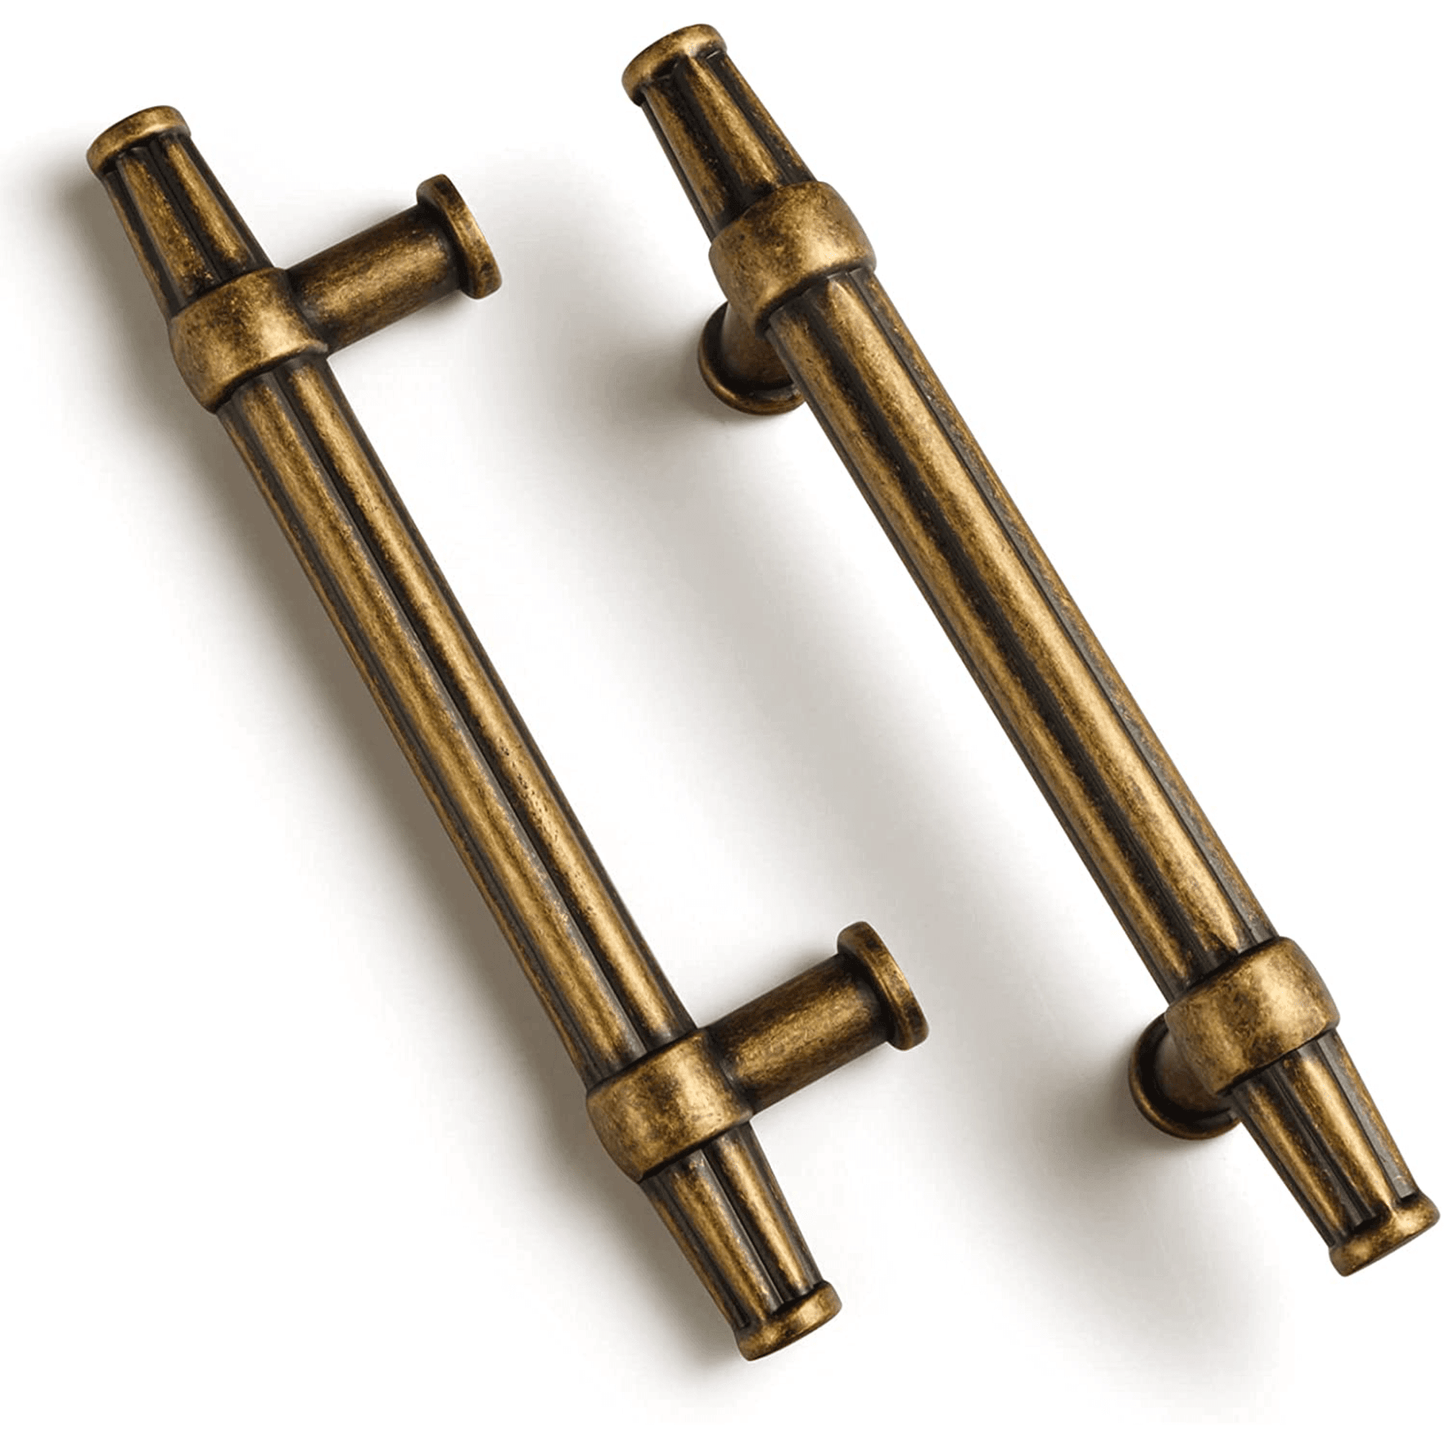 Retro Style Drawer Bar Pulls Antique Cabinet Handles 6 Pack